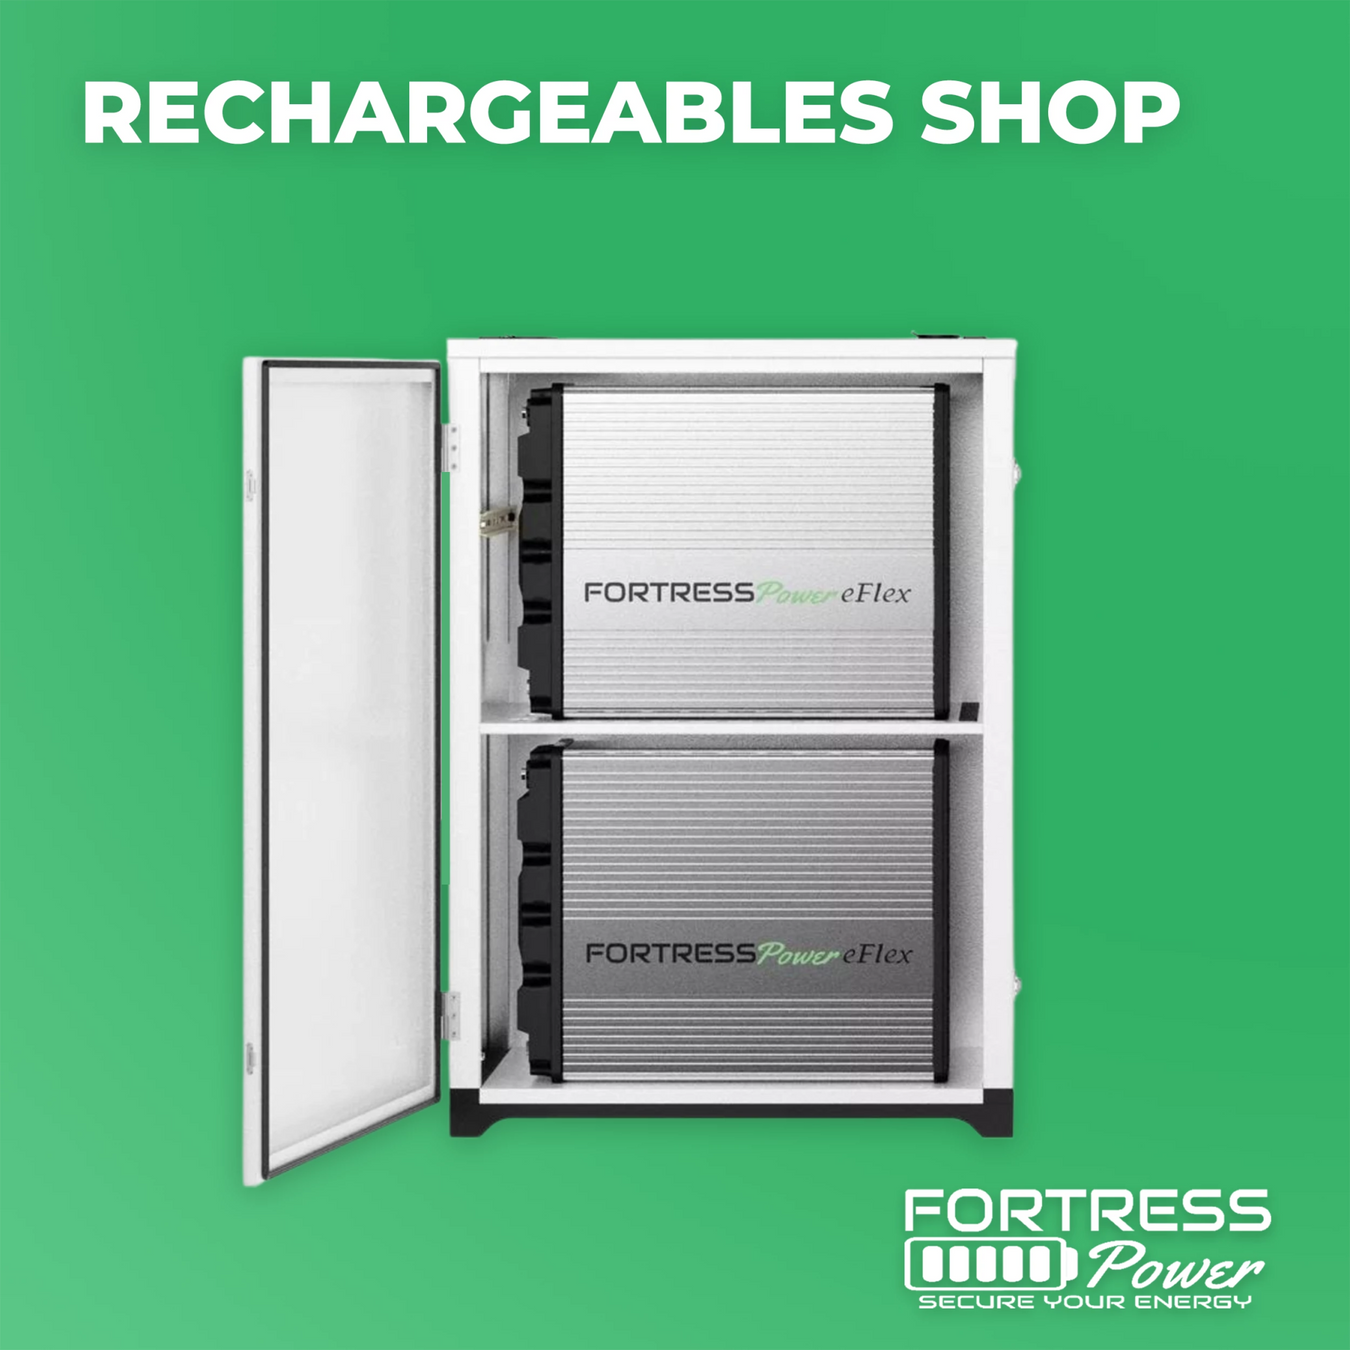 Fortress Power - Rechargeables Shop - PremiumDepot